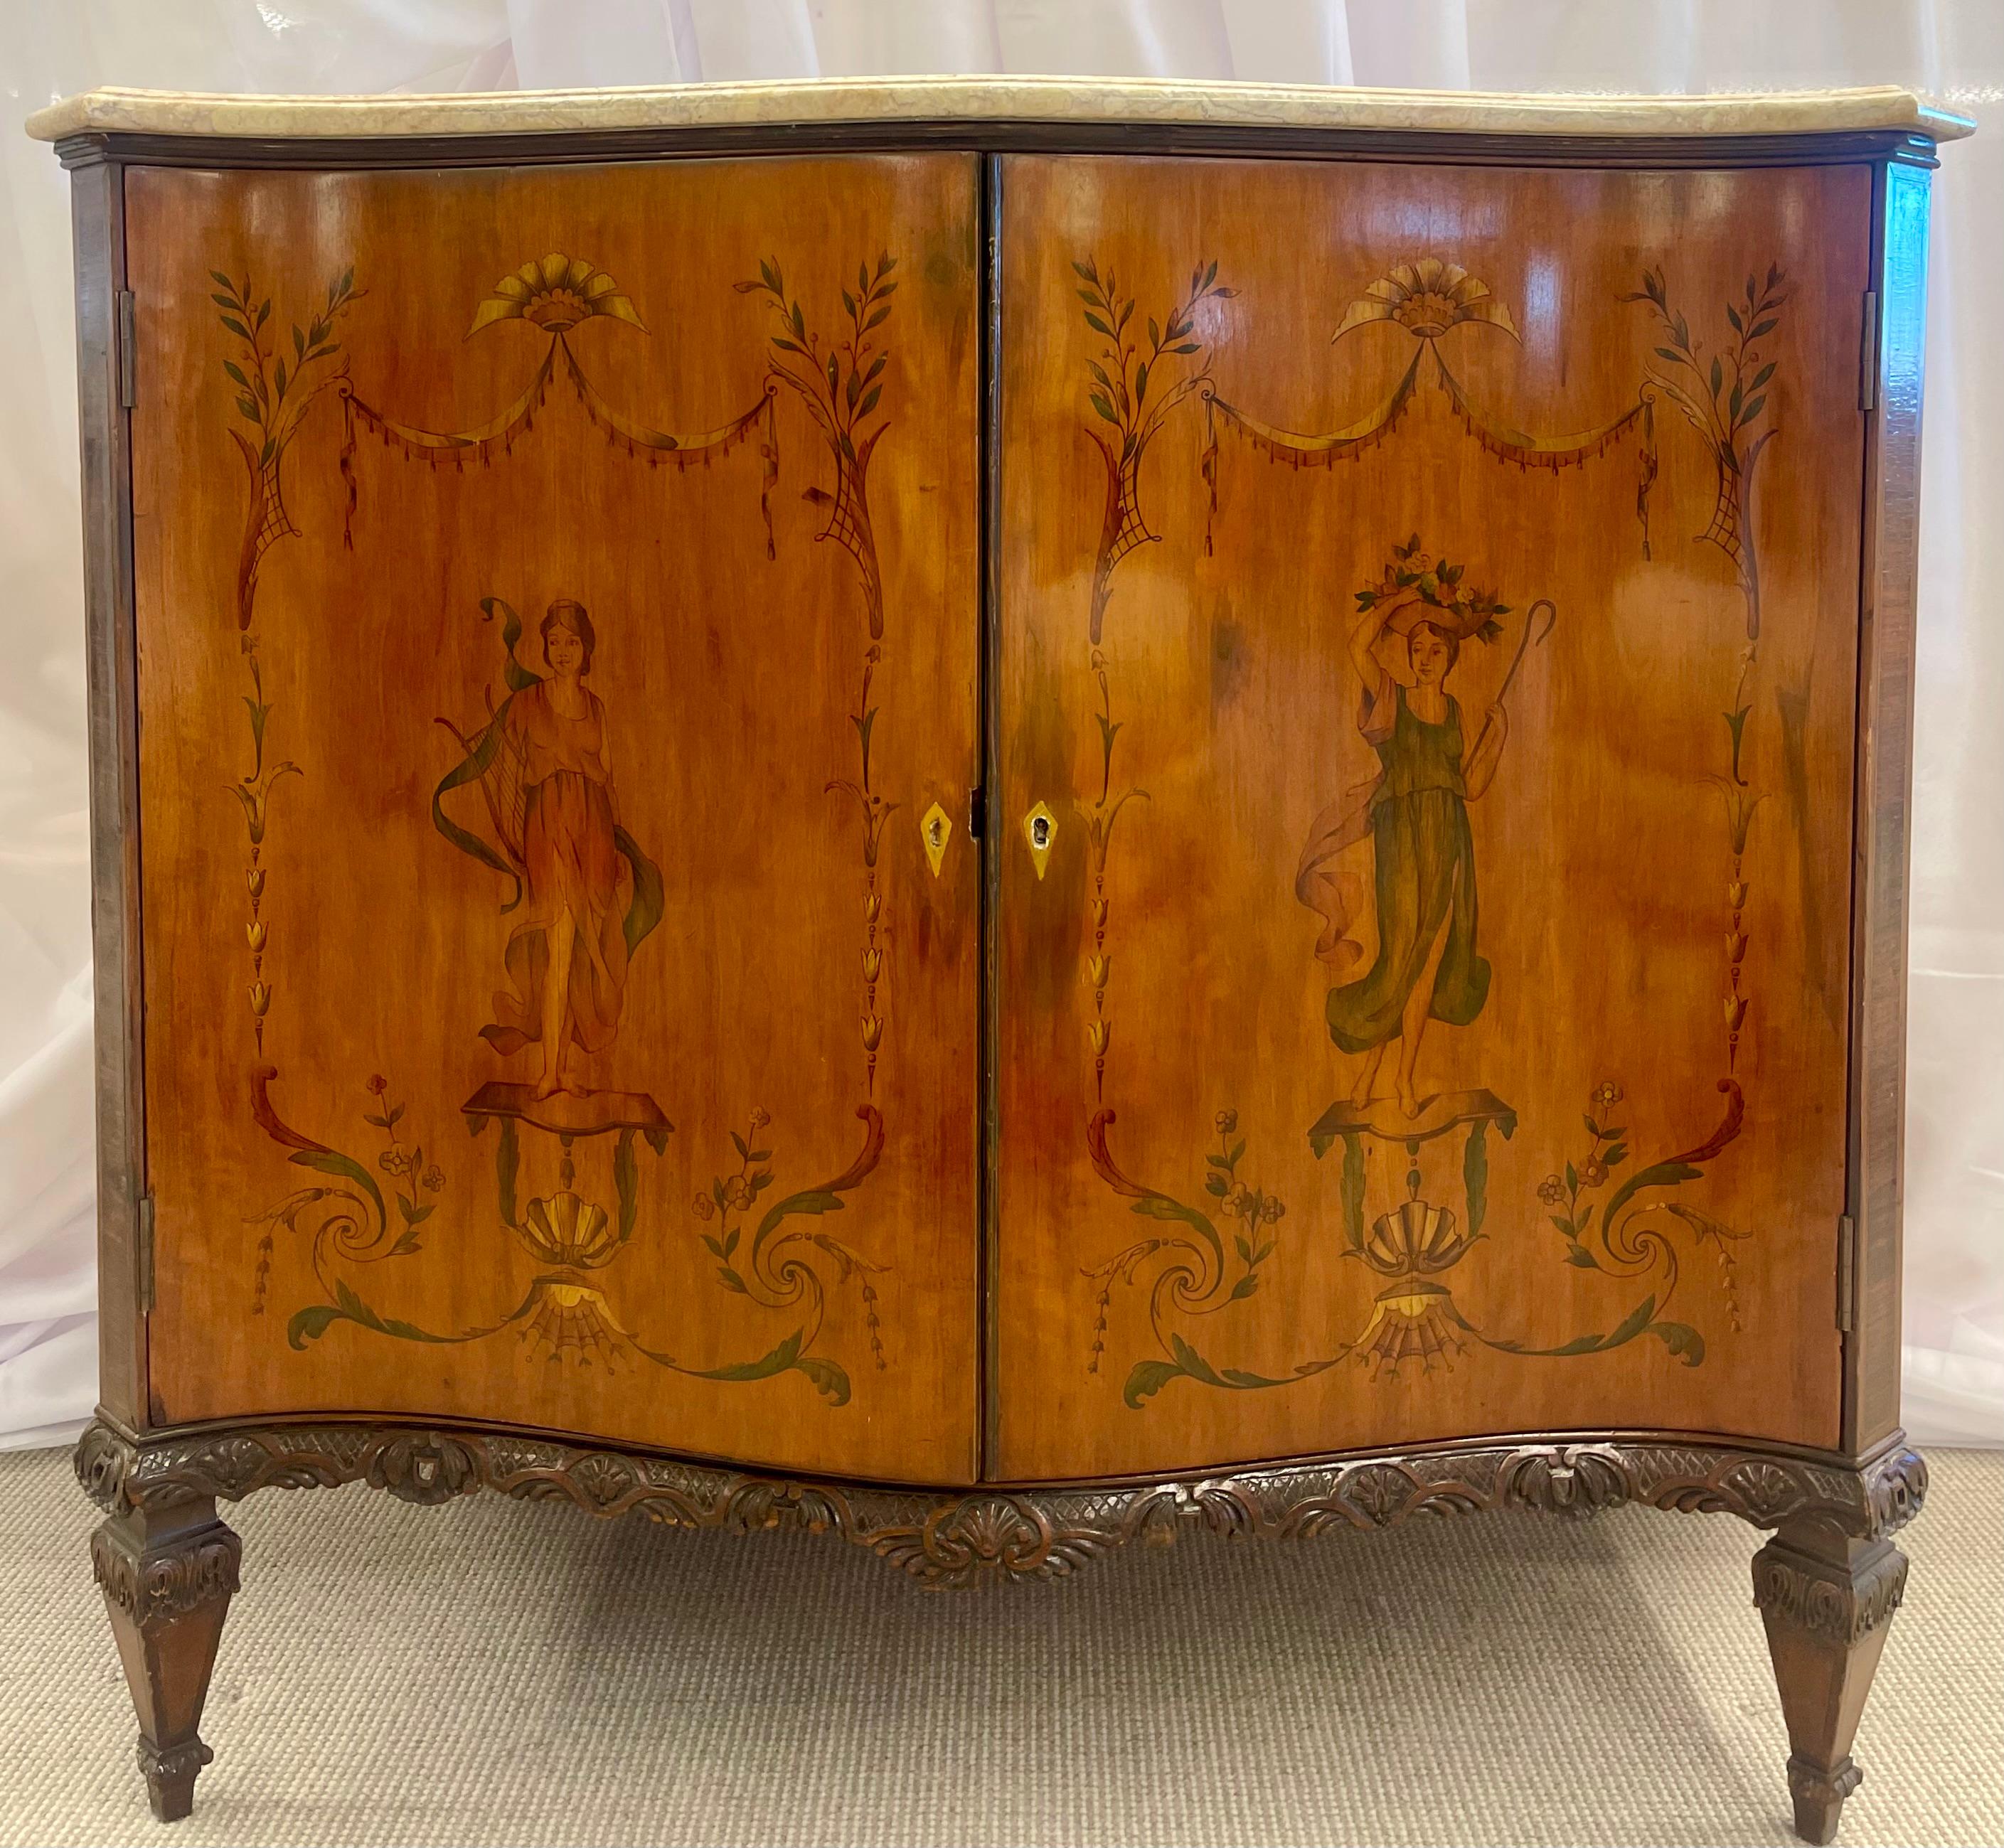 From a NYC Brownstone Estate. A fine Adams style Edwardian marble-top commode. Lovely painted two-door serpentine cabinet depicting a maiden flowing into star-burst serpentine sides supporting a fine marble top. Wonderfully polished.